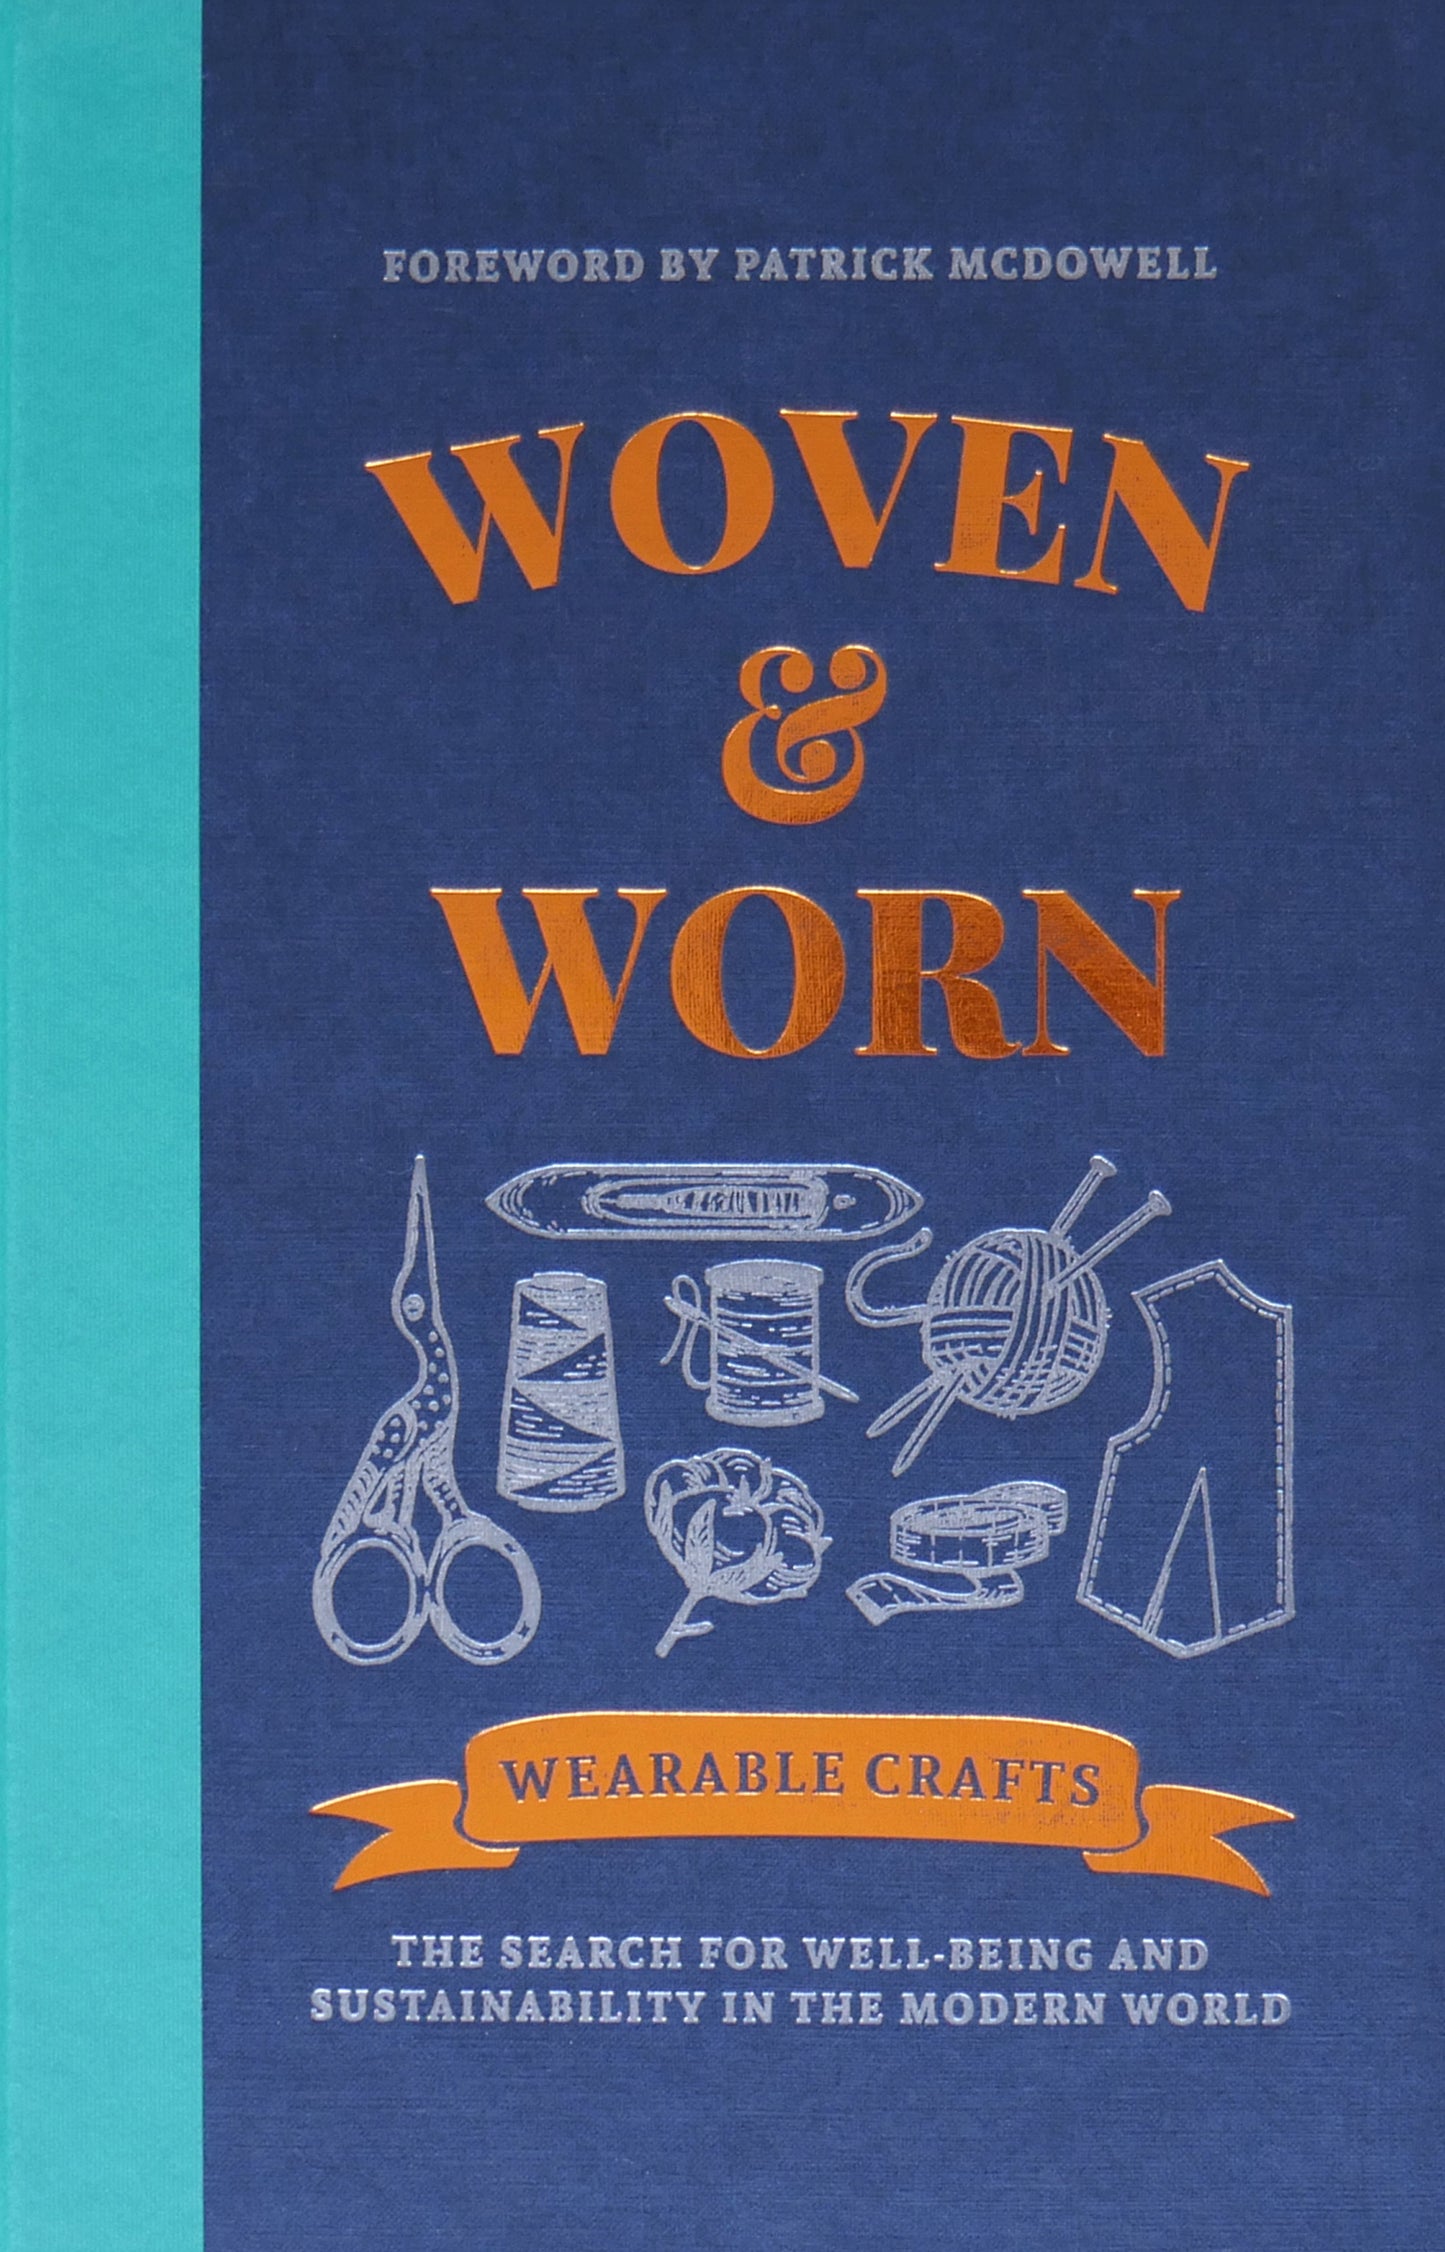 Blue 'Woven & Worn' book cover showing a variety of items for sewing, knitting, and making textiles, with title in gold font.